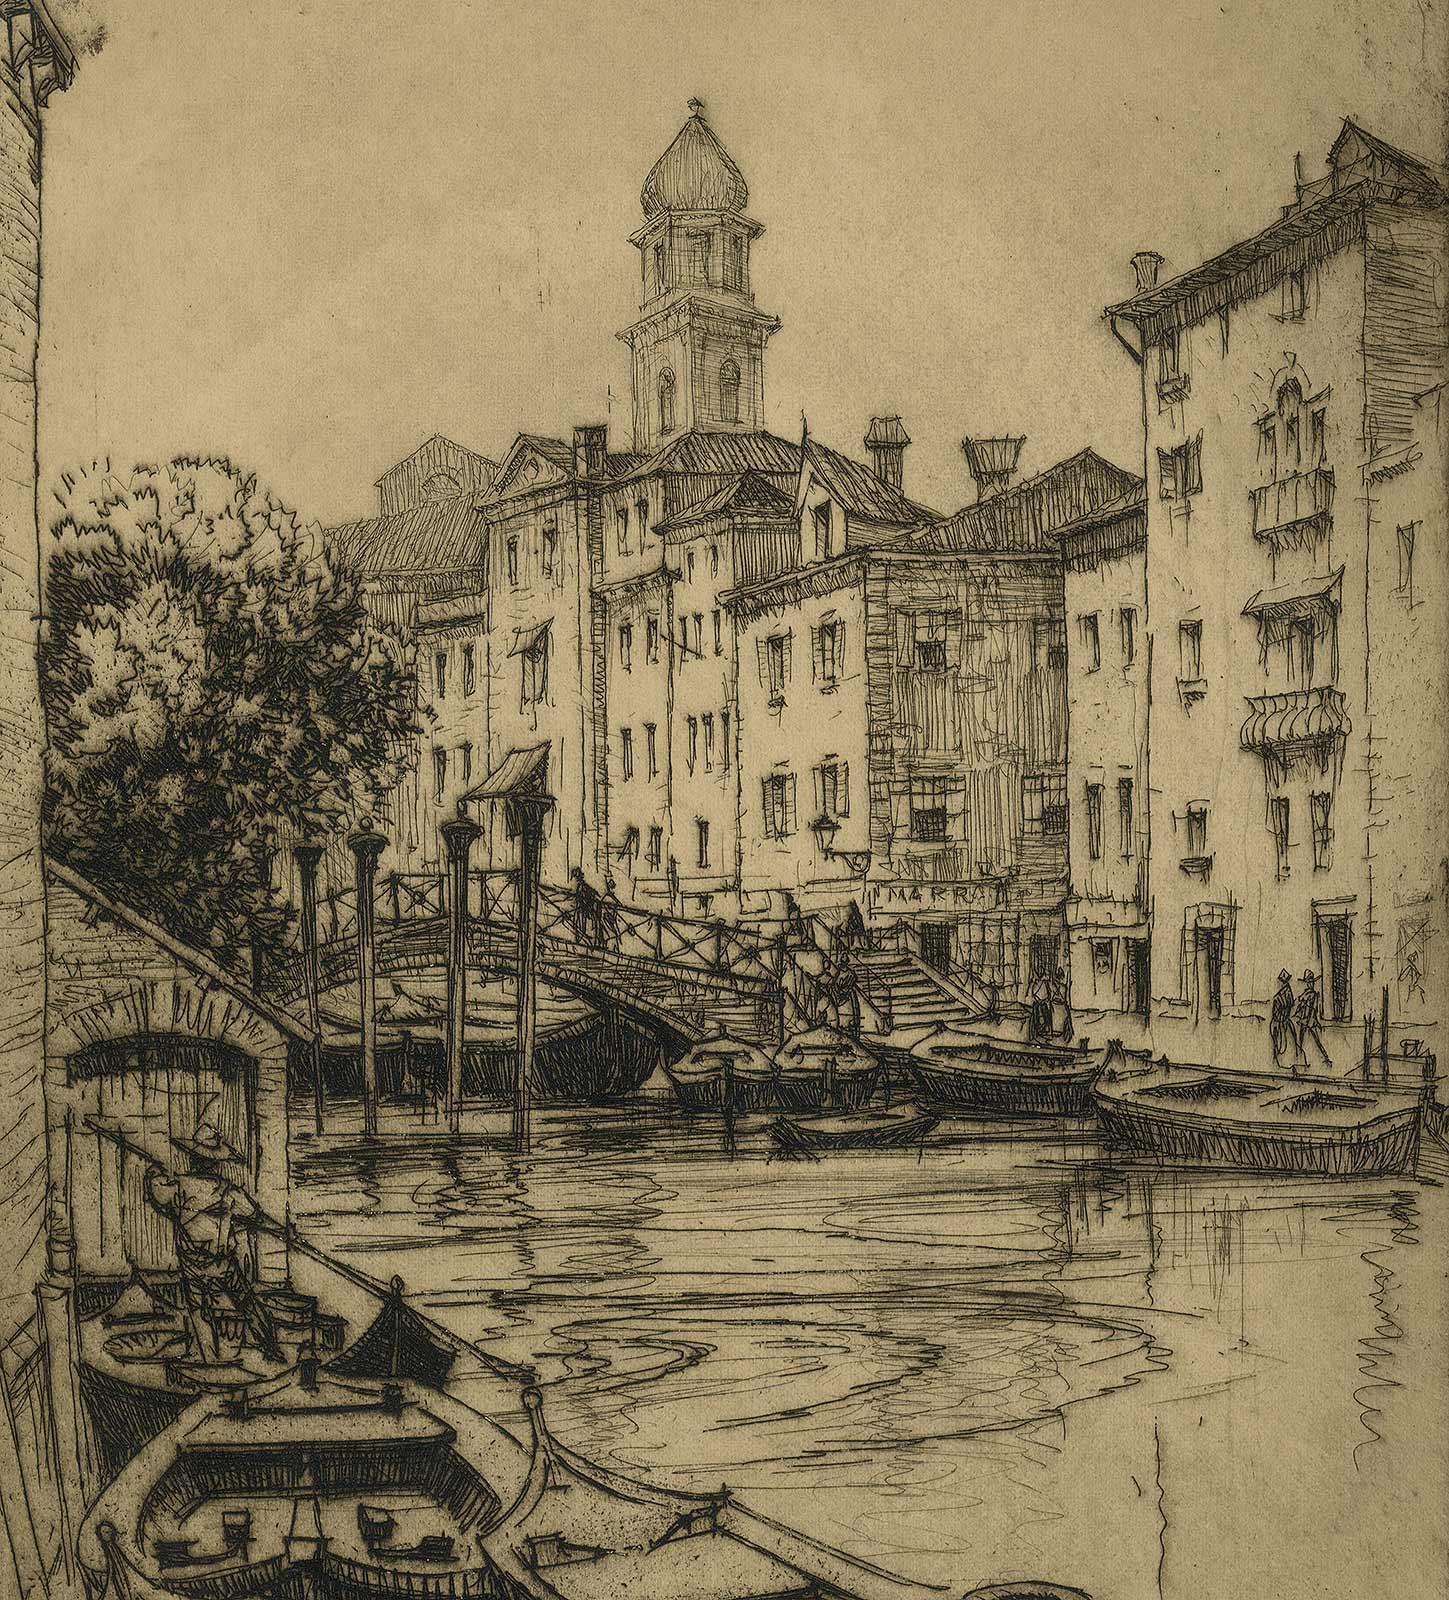 Venice (gondolas, arched bridges and villas along a canal of this fabled city) - Print by André Smith